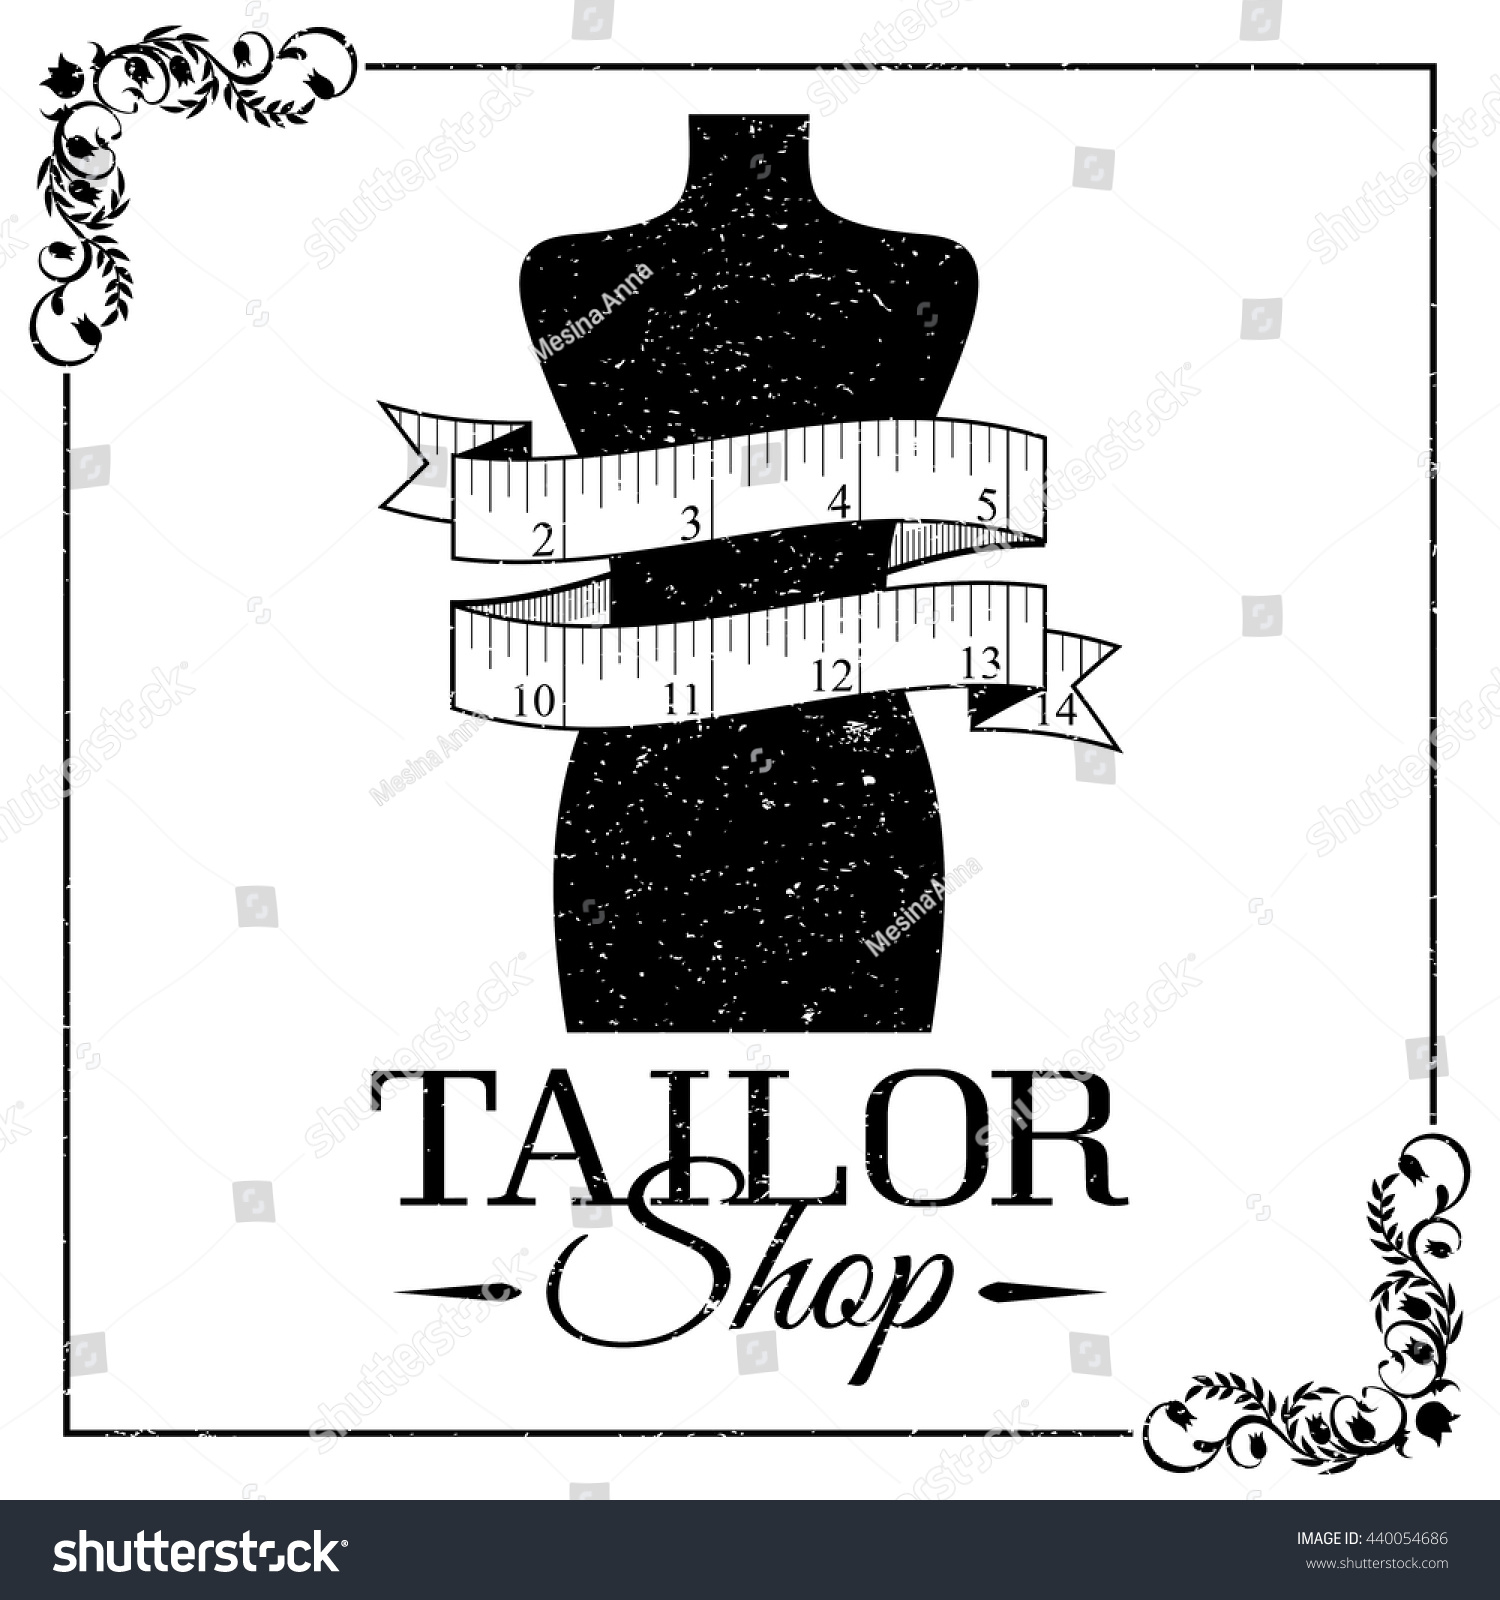 Sewing Supplies Mannequin Tape Measure Black Stock Vector (Royalty Free ...